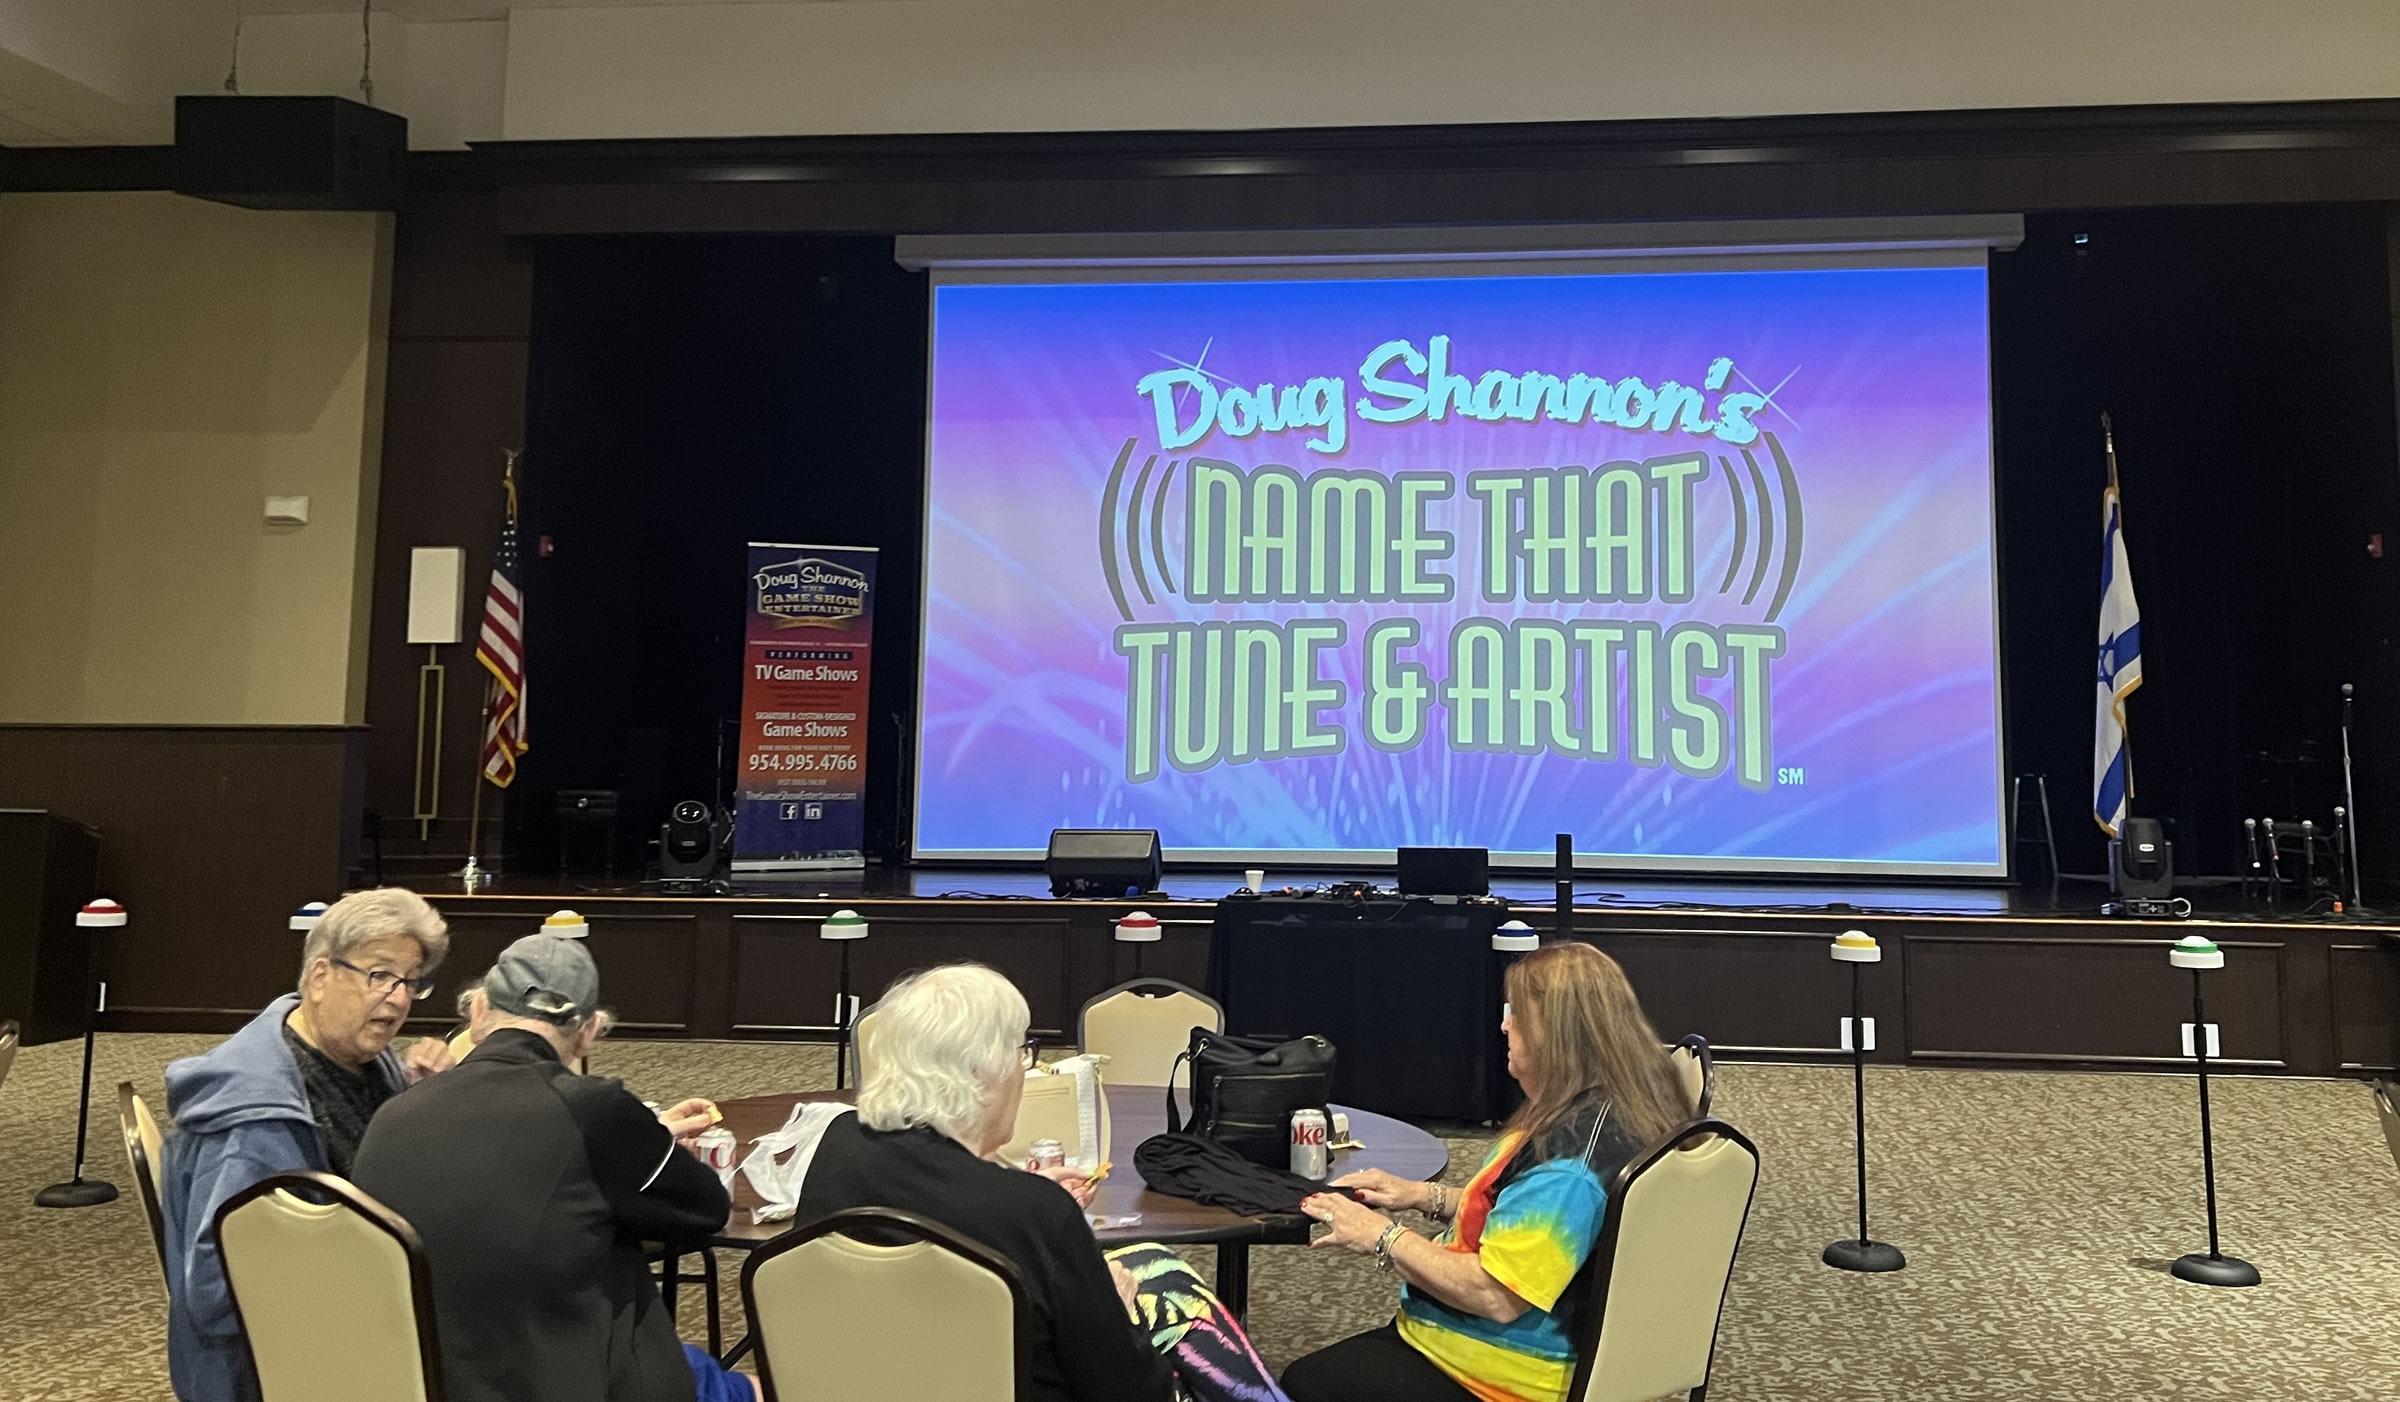 Doug Shannon's Name That Tune and Artist Game Show showing contestants holding game buzzers